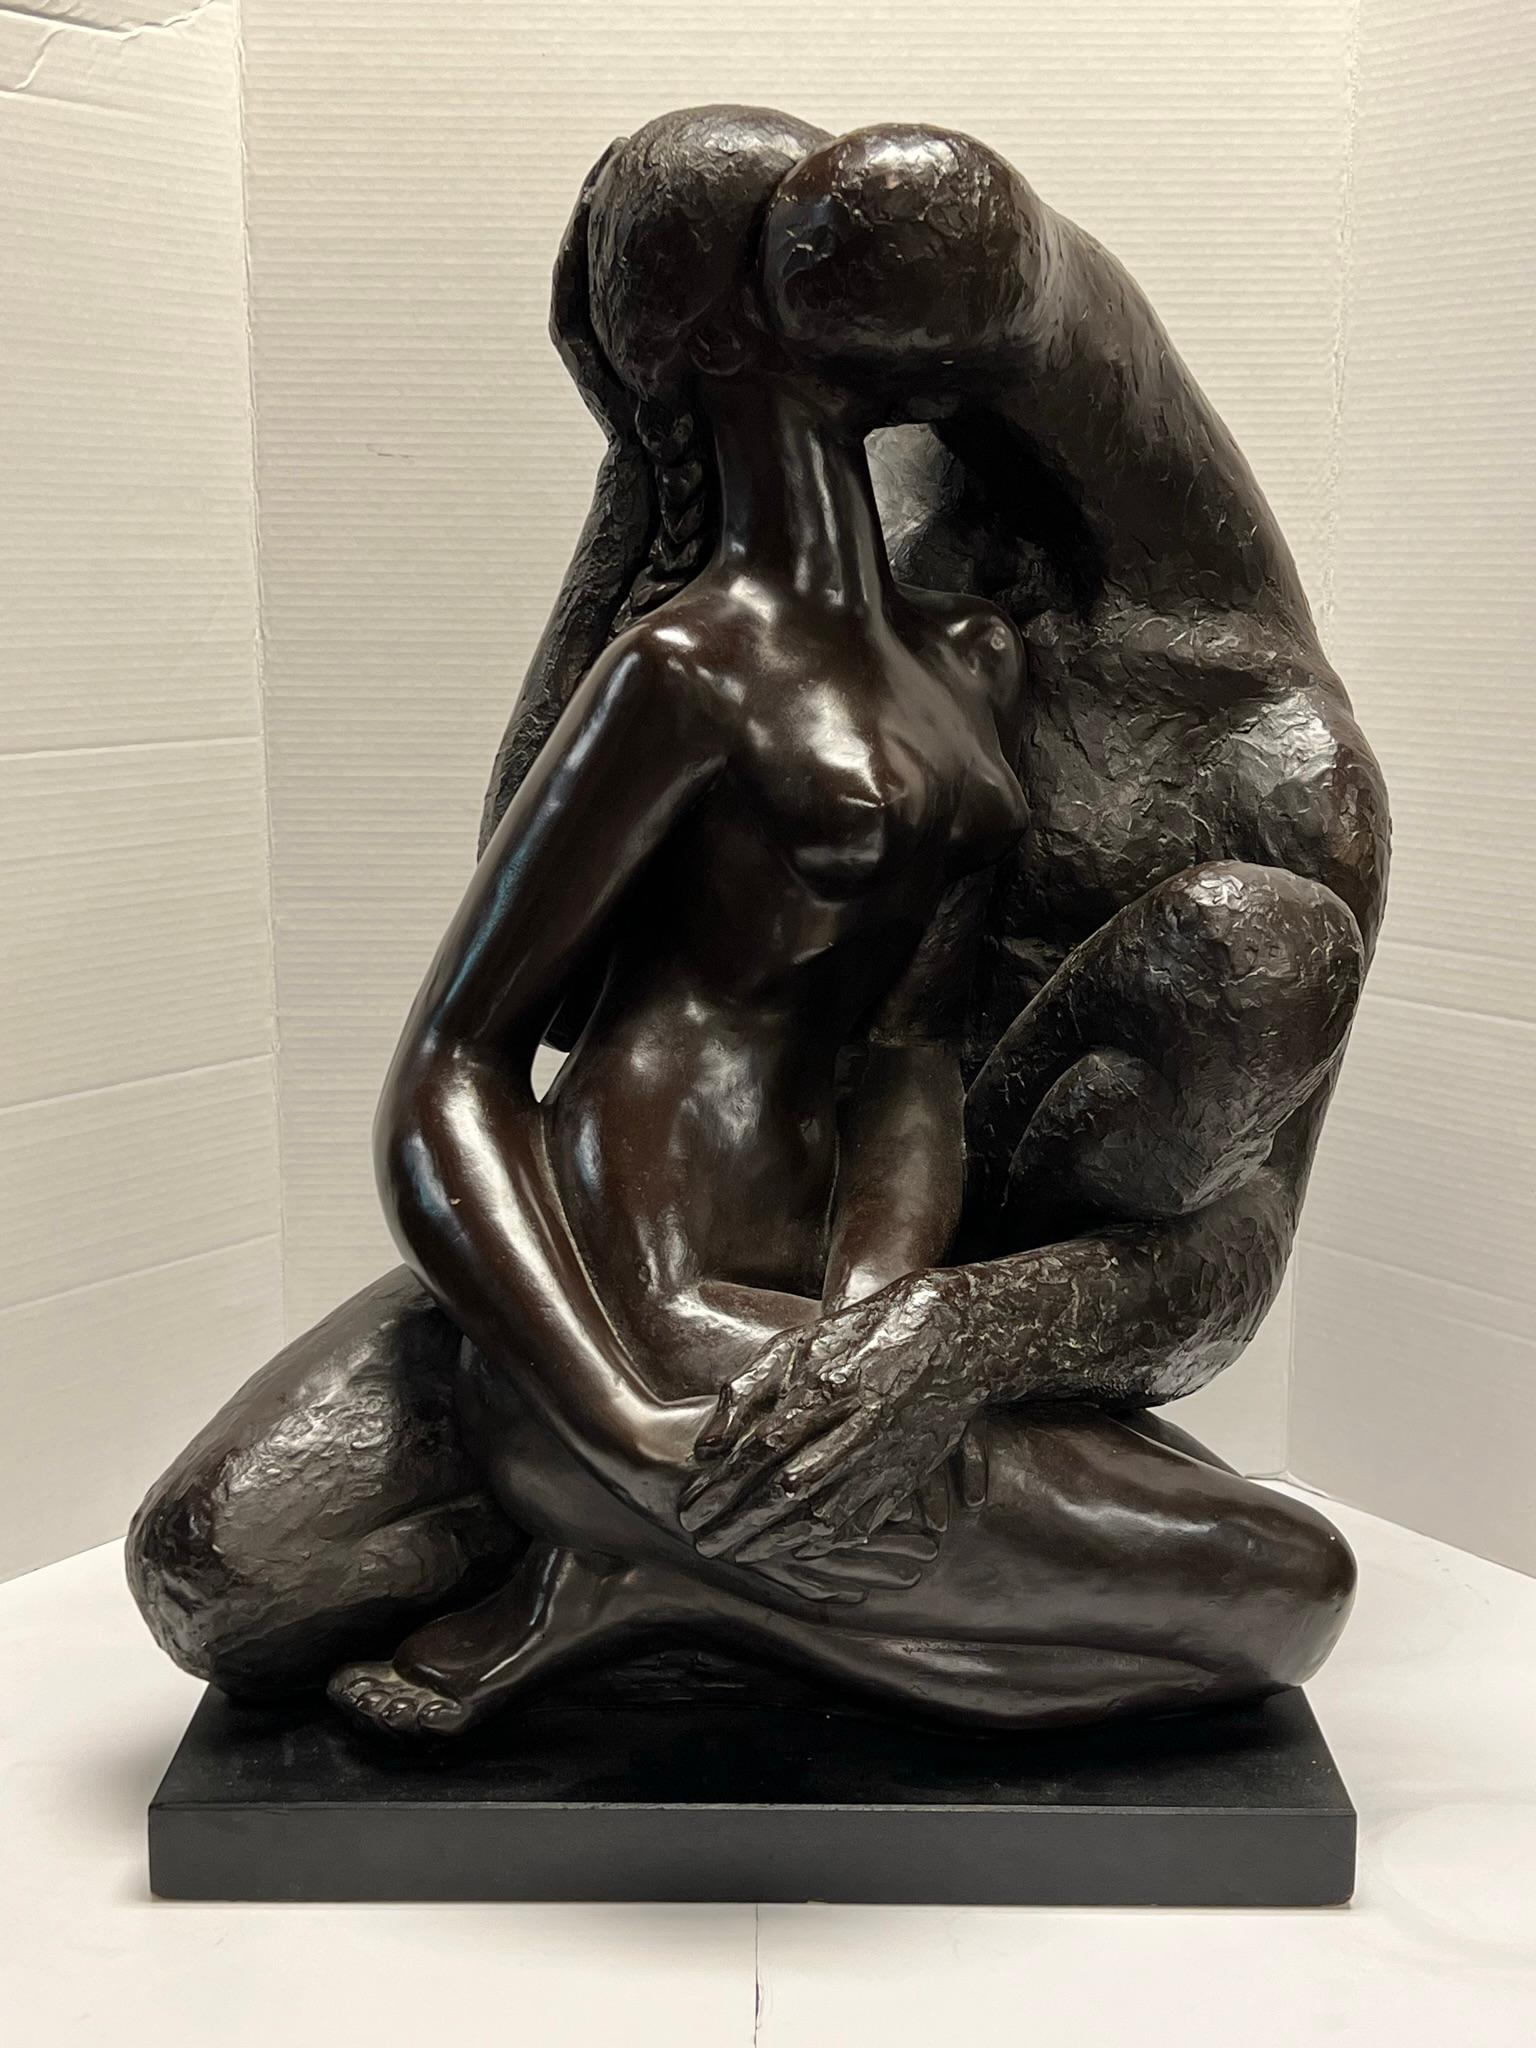 Painted plaster sculpture in the brutalist style by the Cuban sculptor, Manuel Carbonell (1918-2011), depicting seated, embraced figures of a grotesque and abstract male kissing a lovely nude female.  Produced by Austin Productions, circa 1990s. 